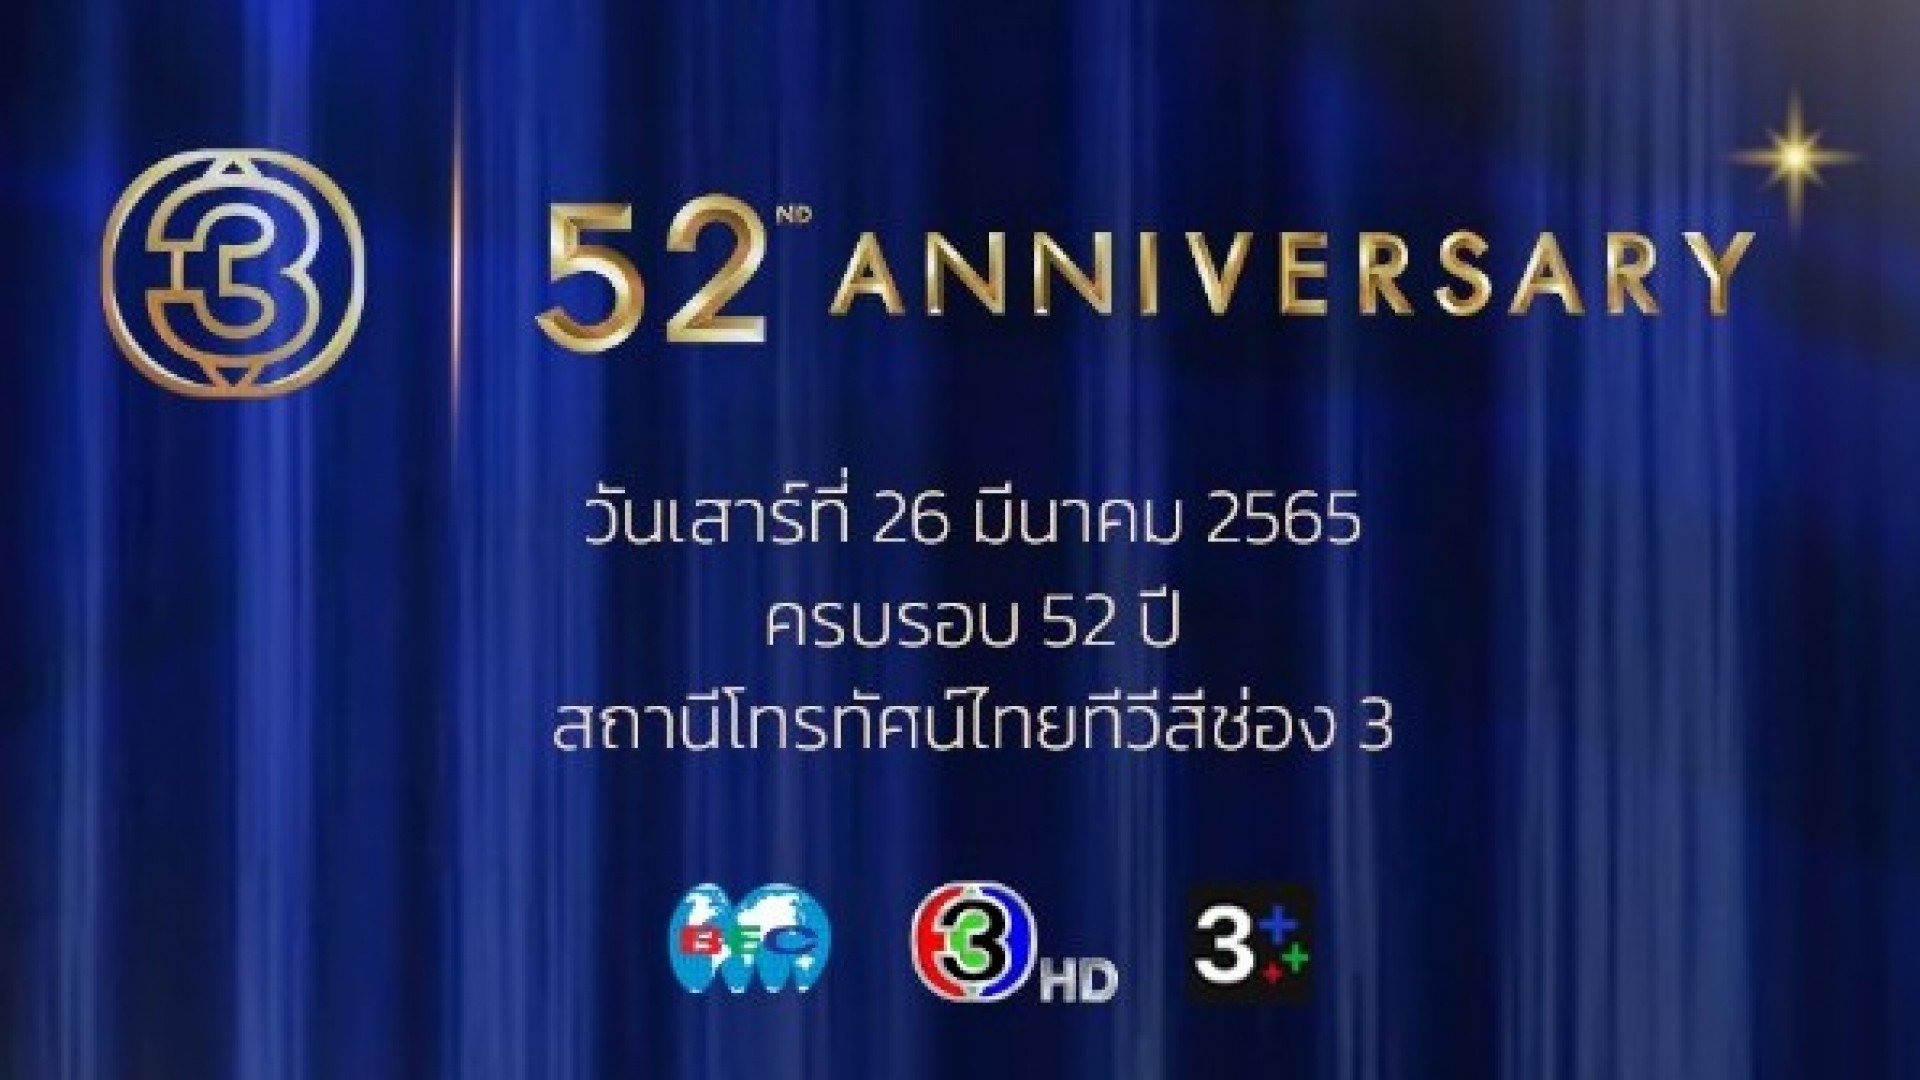 Channel 3 announced postponement of the 52nd anniversary celebration due to the pandemic